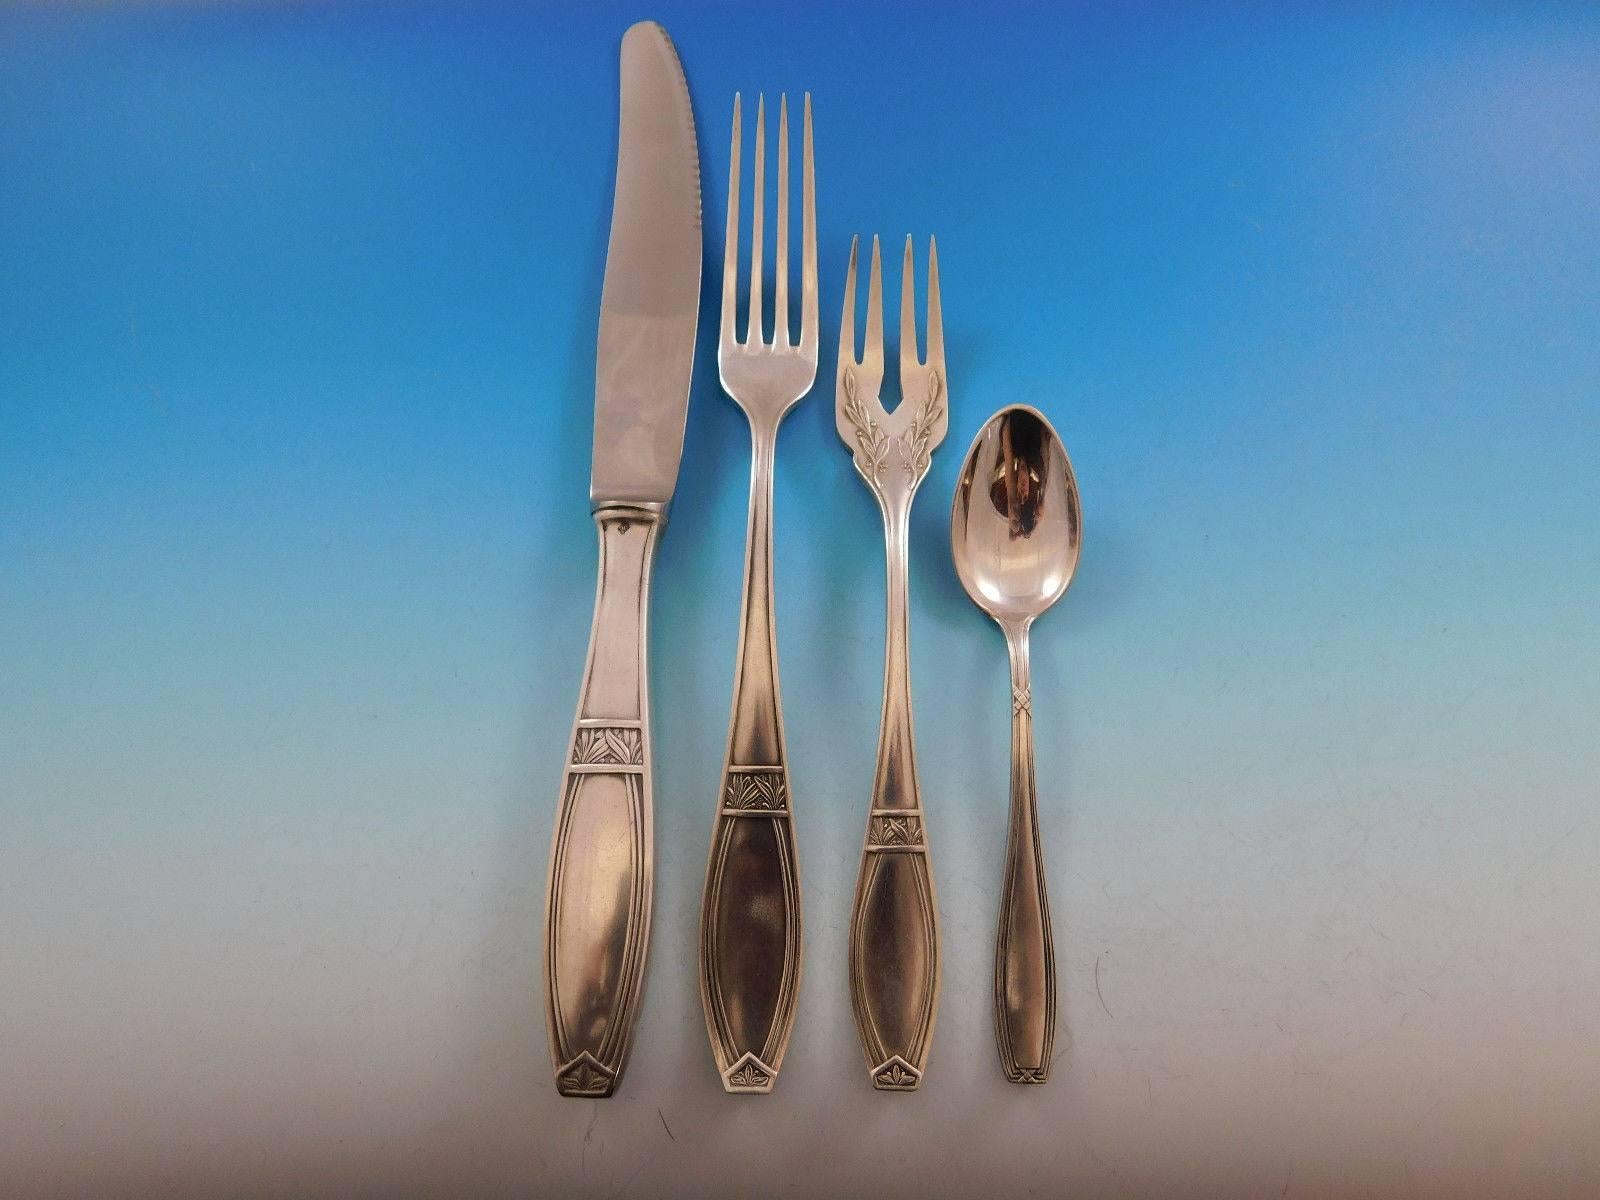 Outstanding German Art Deco style Silverplated flatware set by C.B. Schroeder, 156 pieces in original fitted chest. This set includes:

12 Dinner Size Knives, serrated, 10 1/8